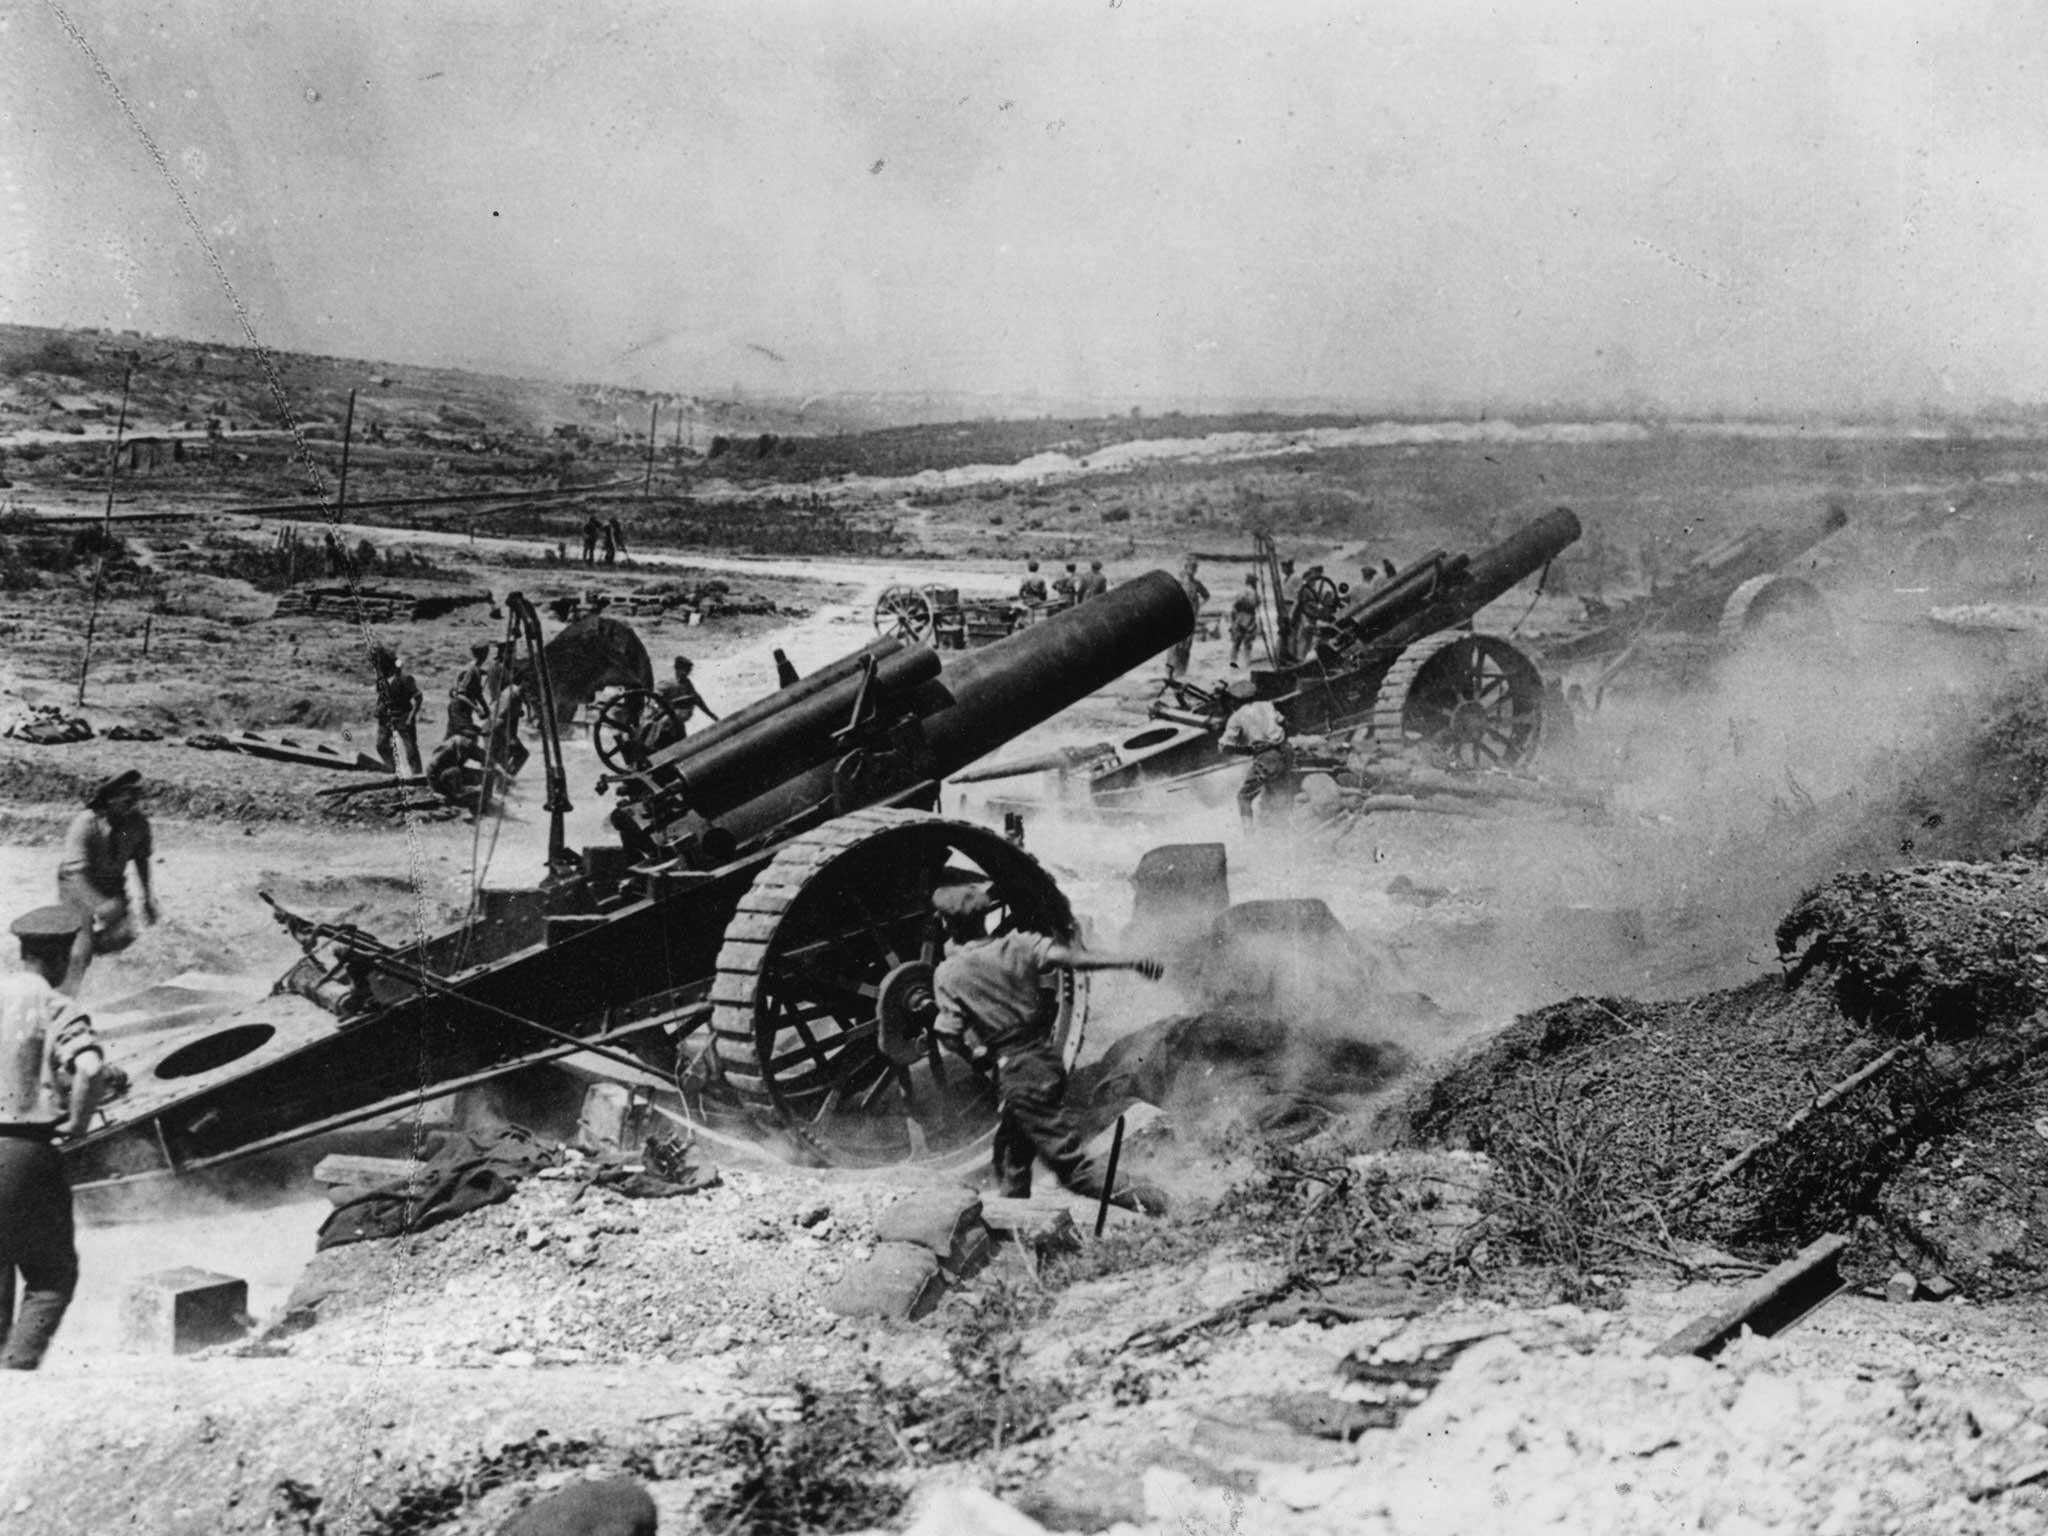 There was a seven-day artillery bombardment of the German lines before the offensive